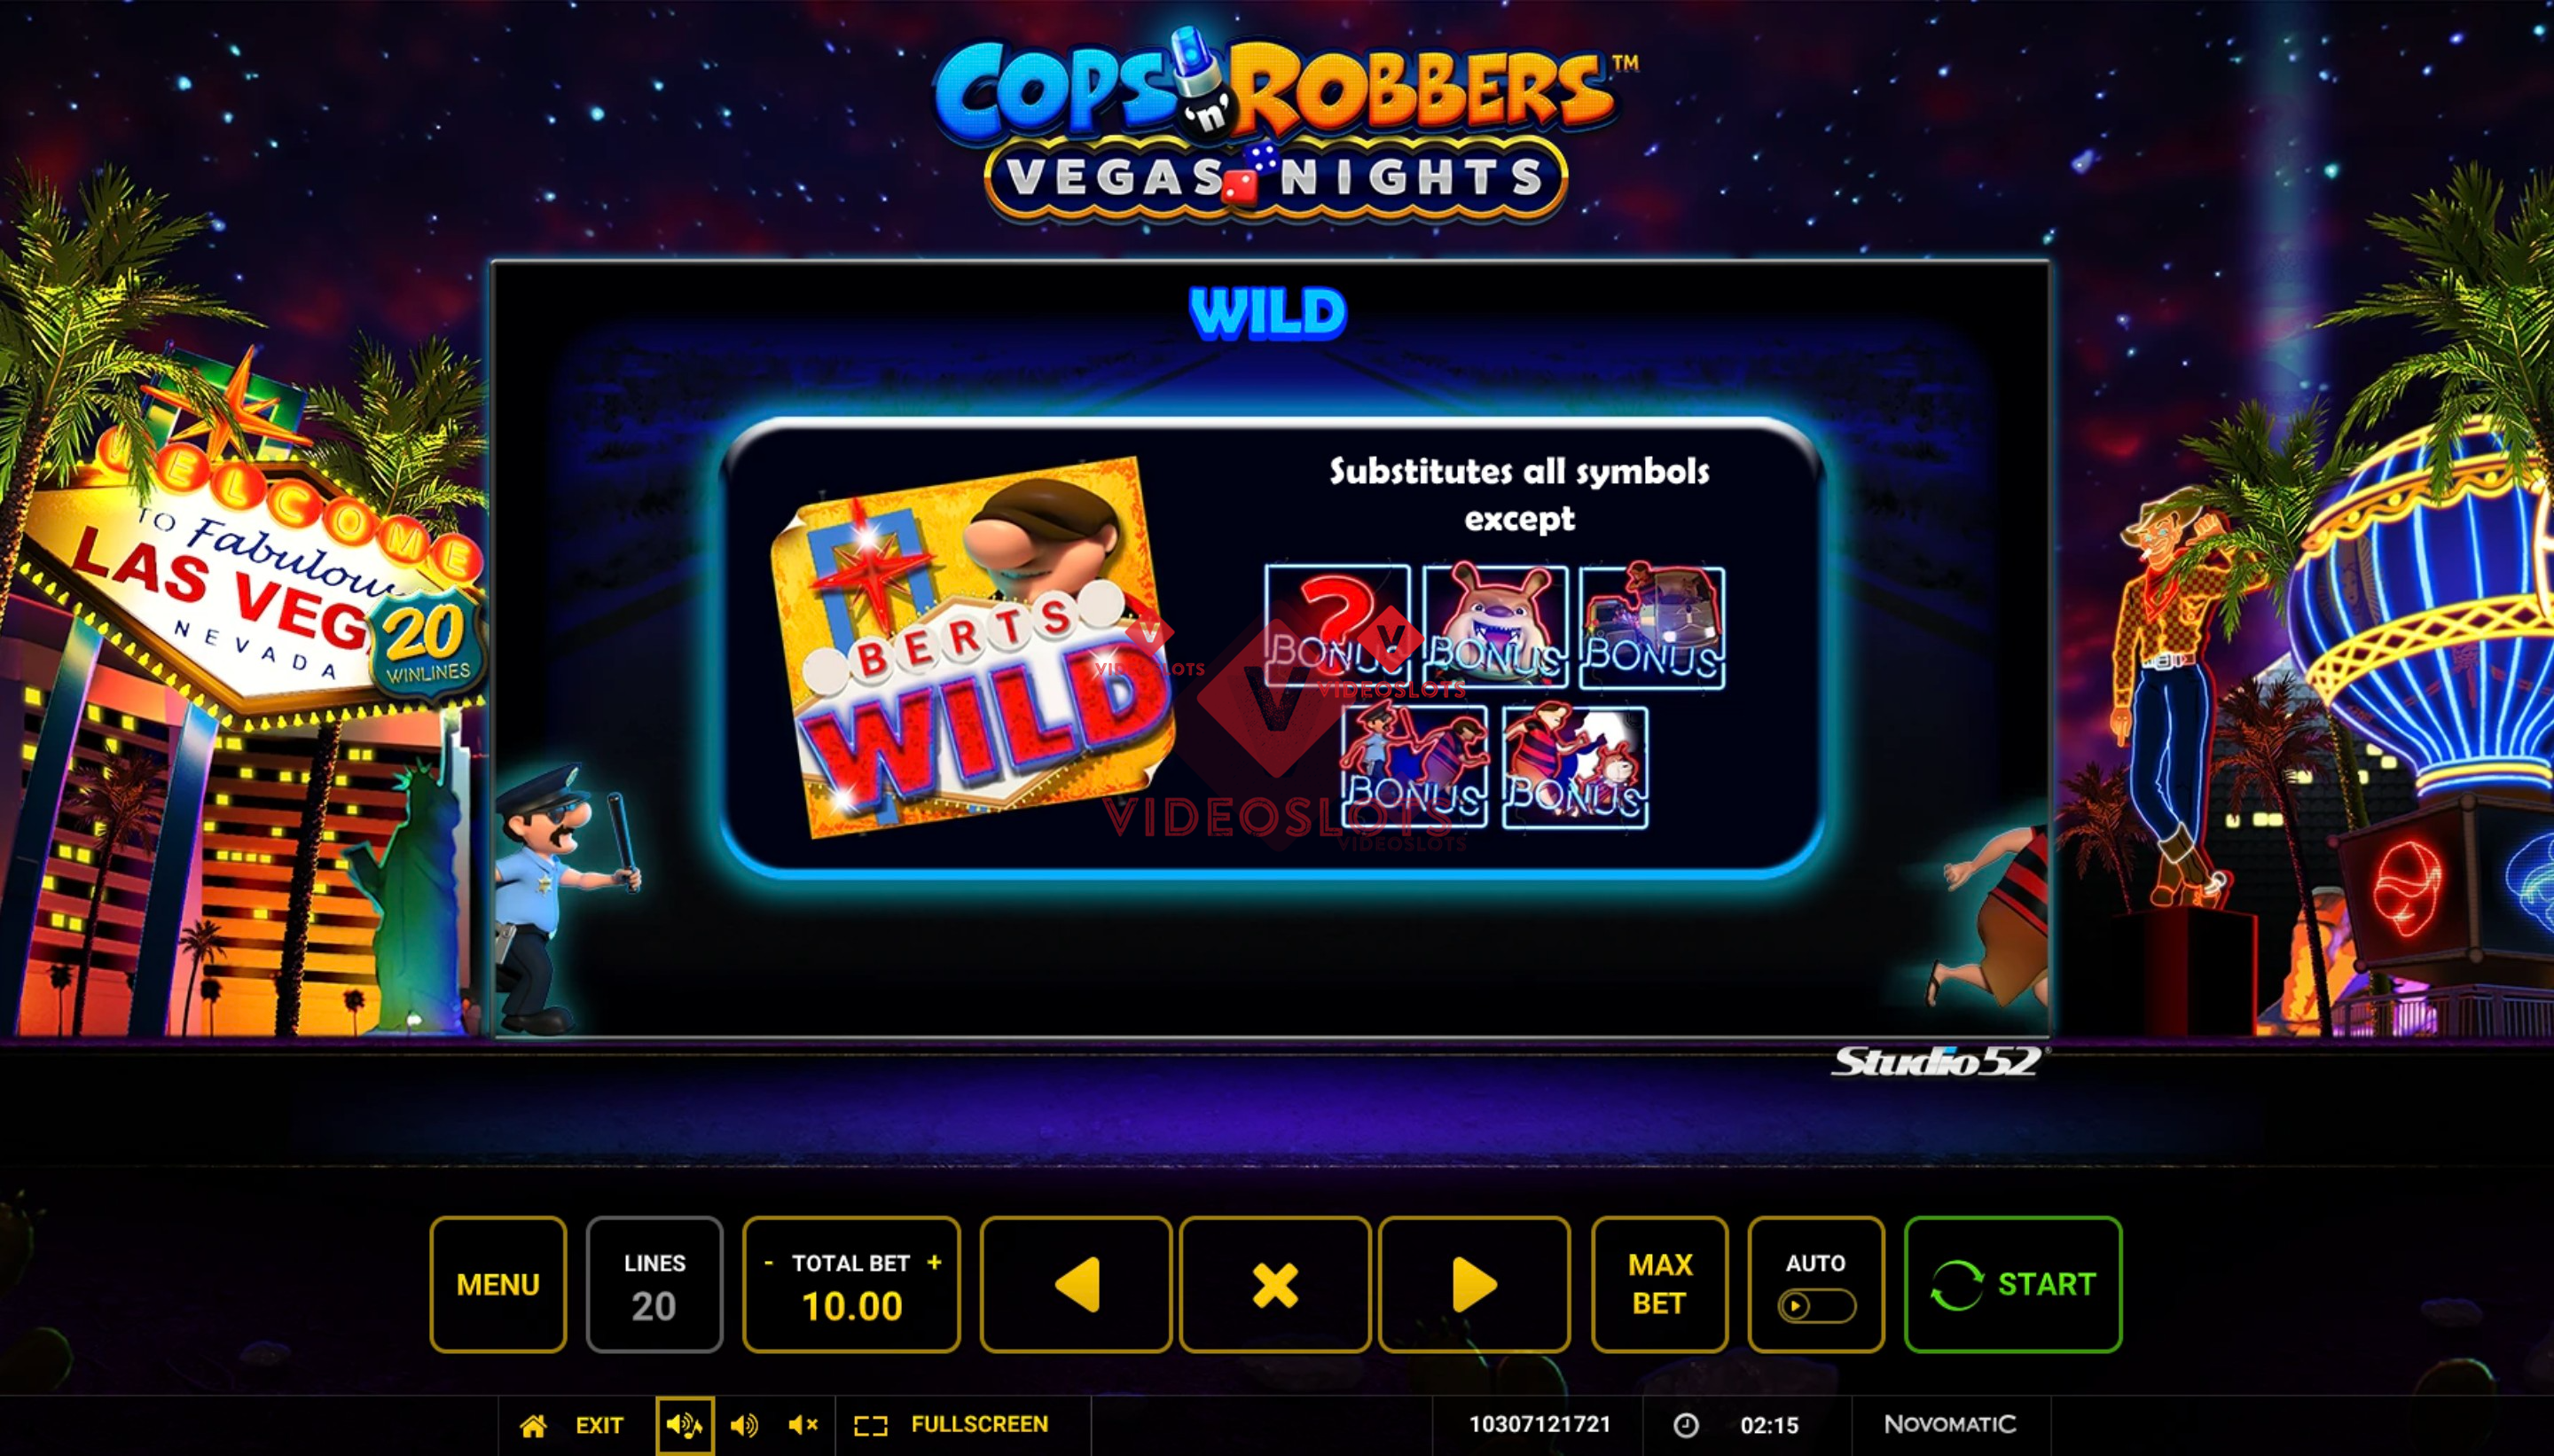 Pay Table for Cops 'n' Robbers Vegas Nights slot from Greentube